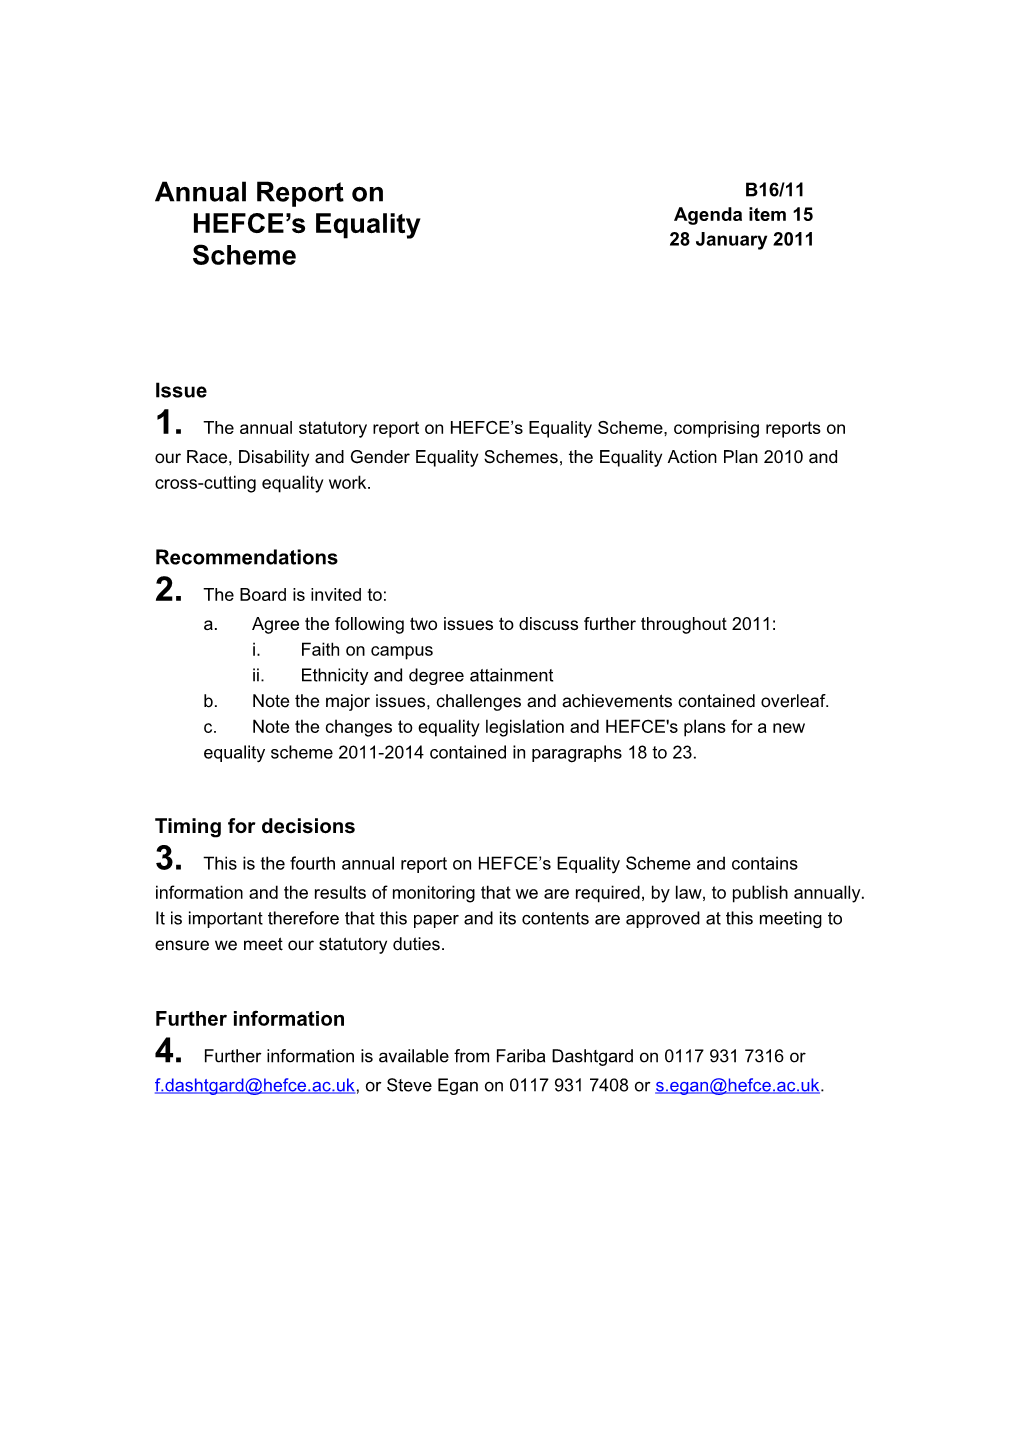 Annual Report on HEFCE S Equality Scheme